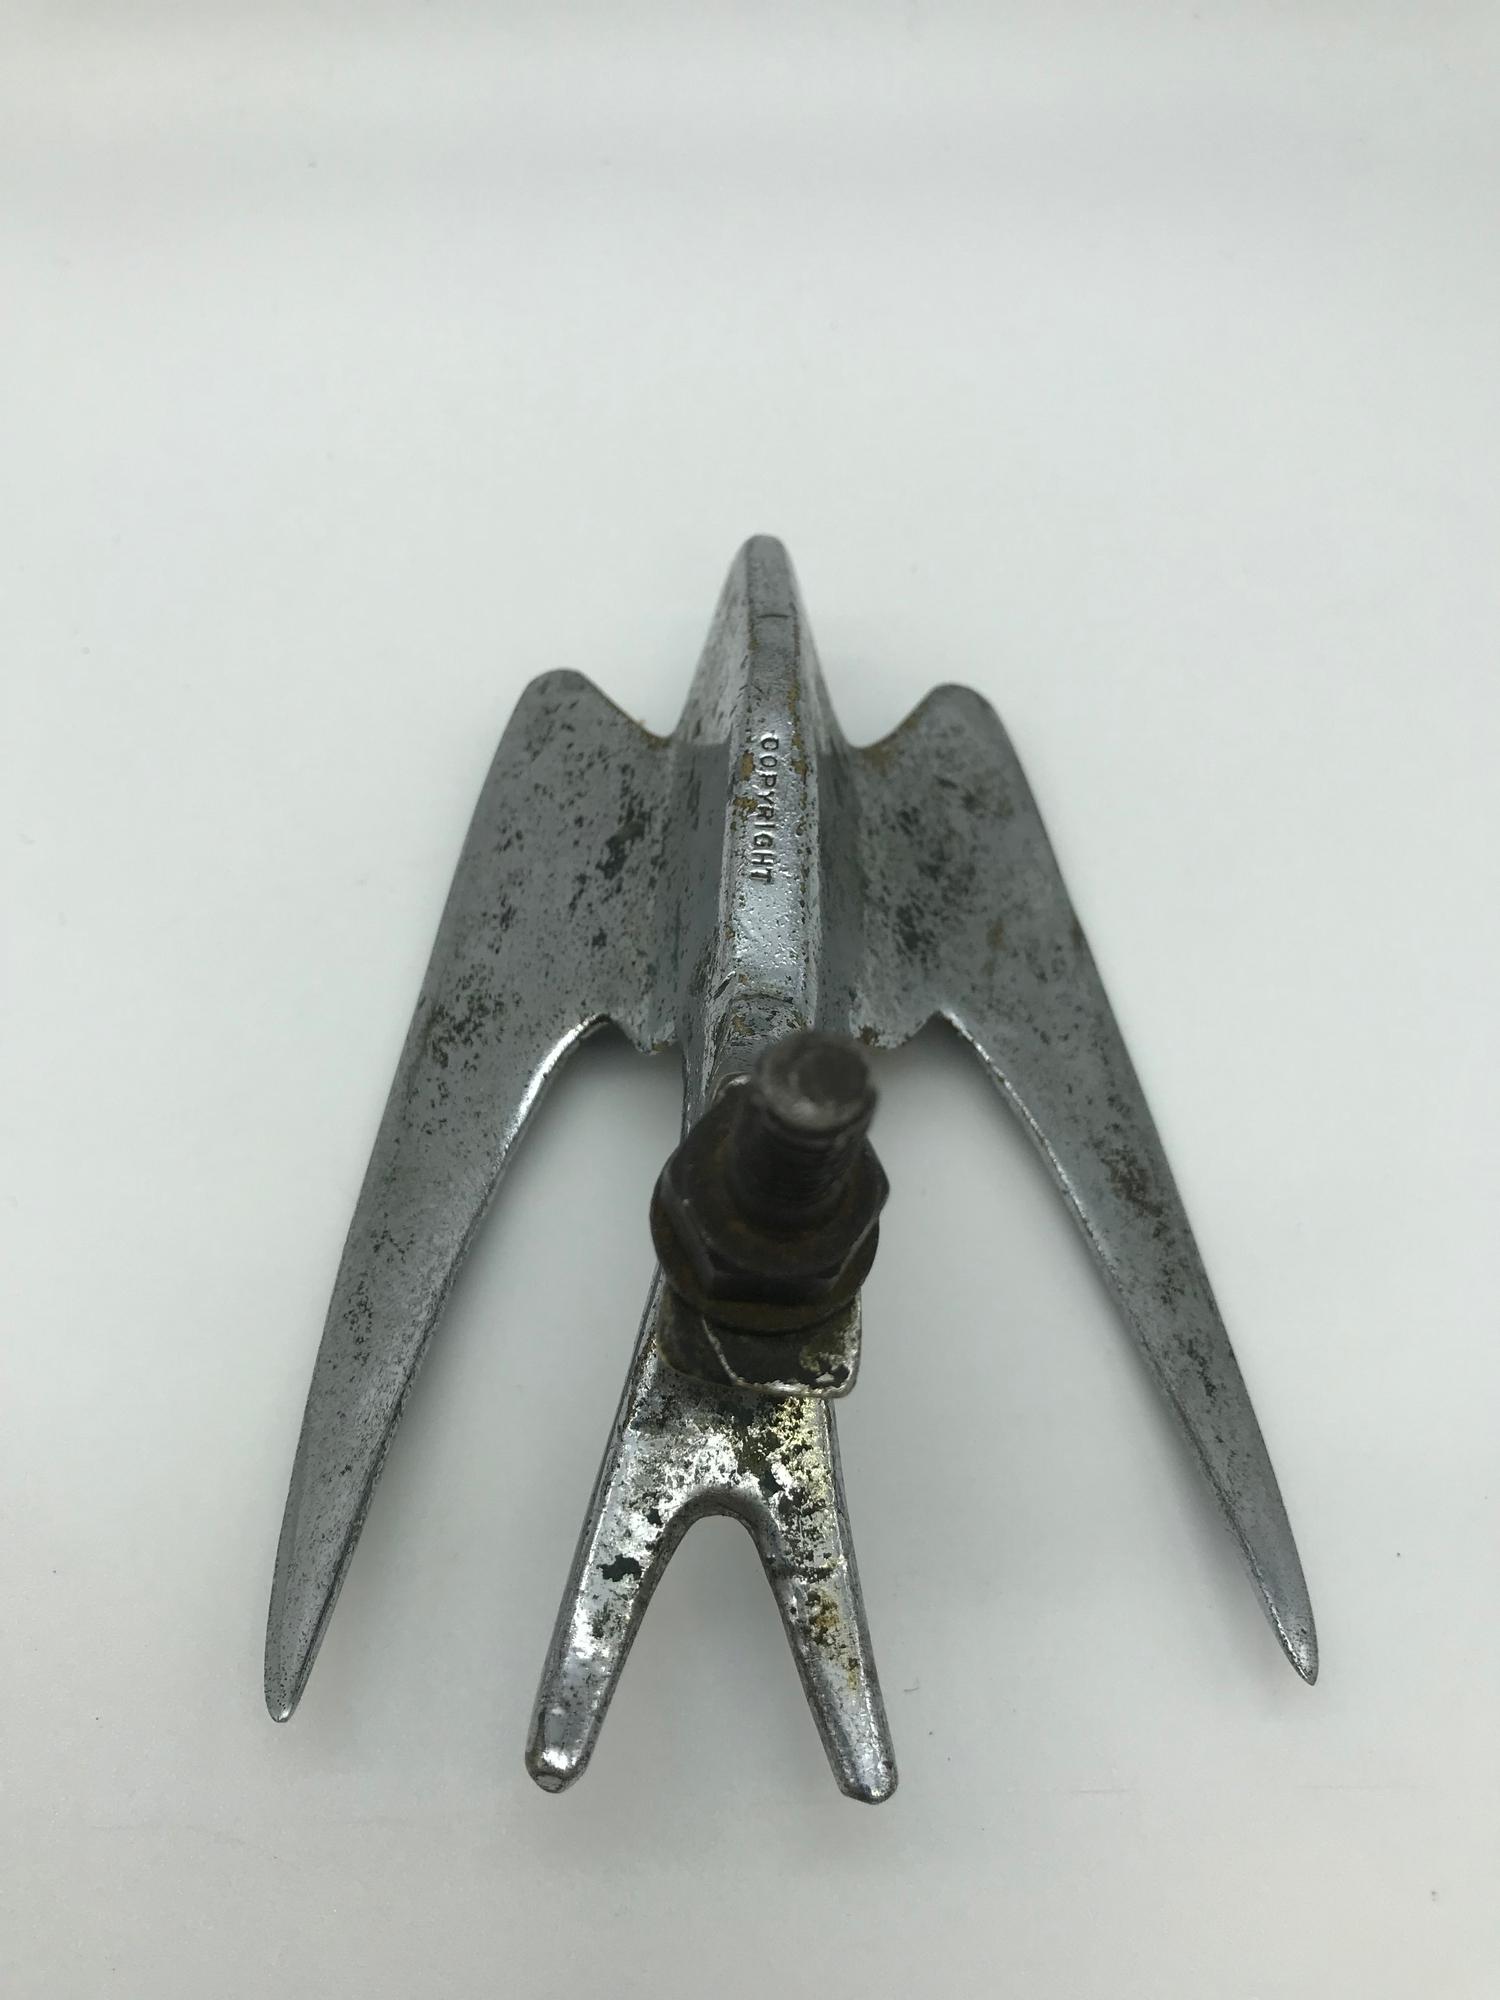 A 1930s Swift/ Swallow bird car mascot by Desmo. Measures 13cm in length. - Image 3 of 3